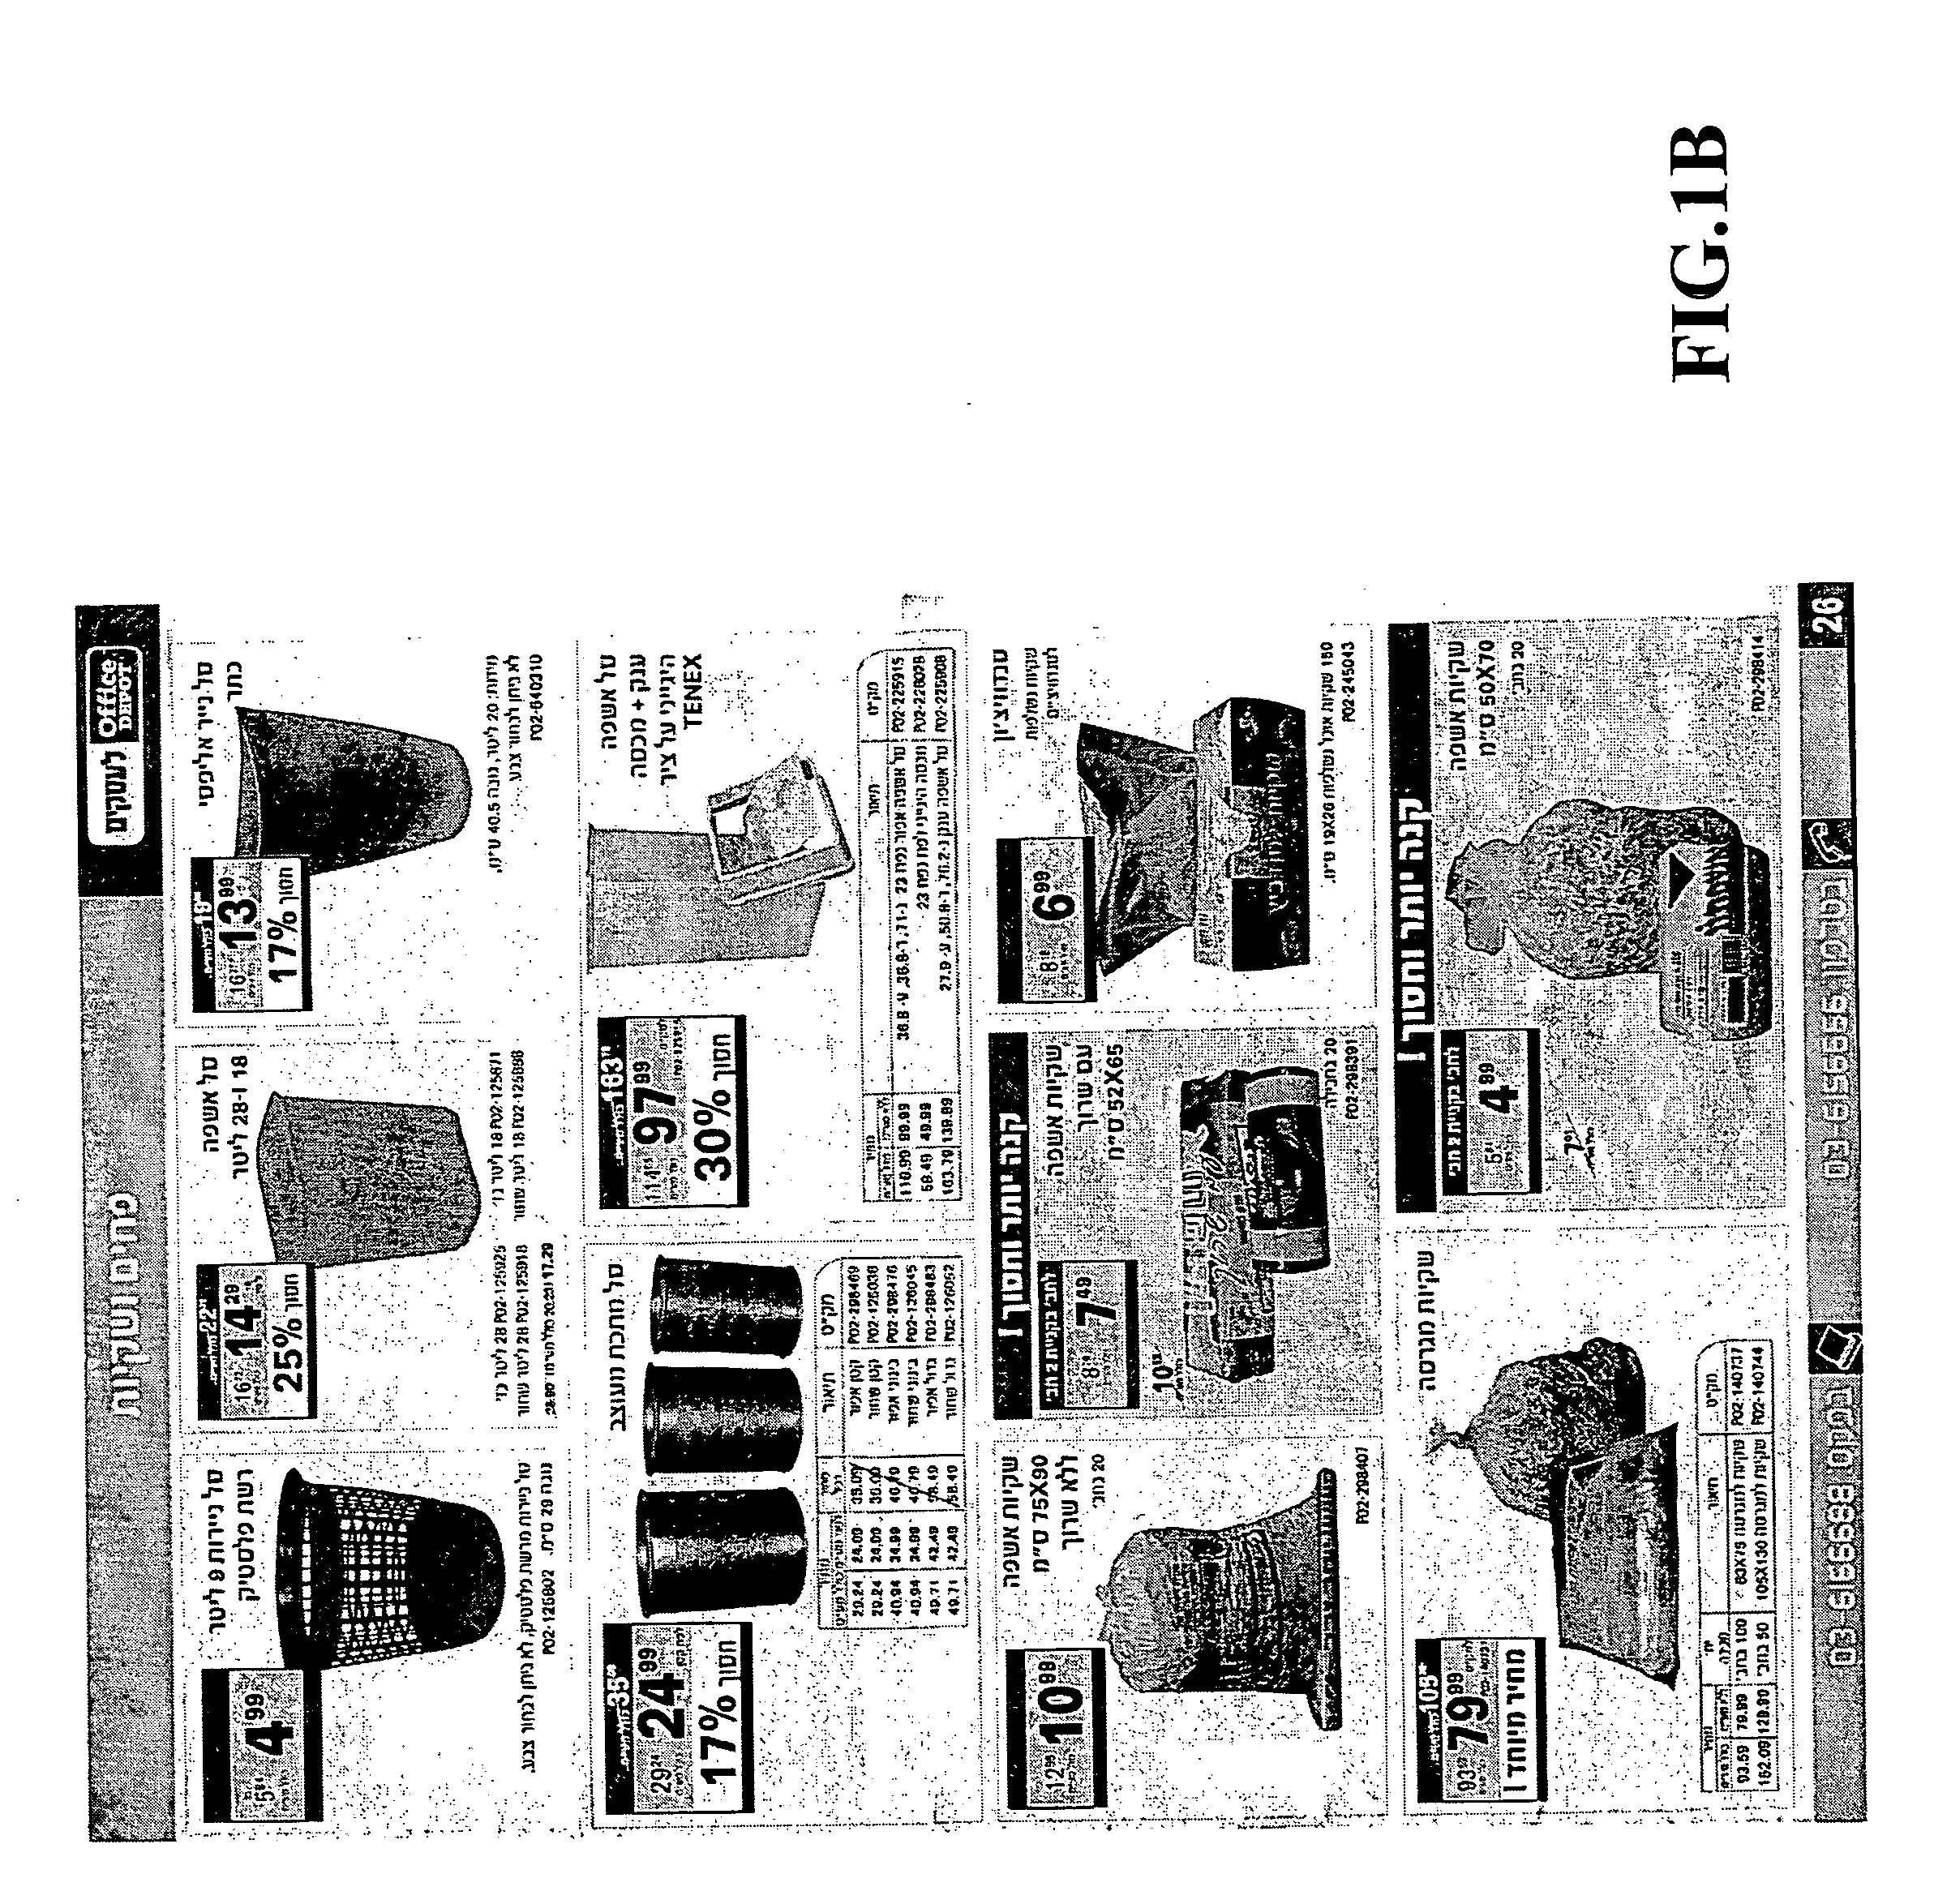 Method, system and computer readable code for automatic reize of product oriented advertisements